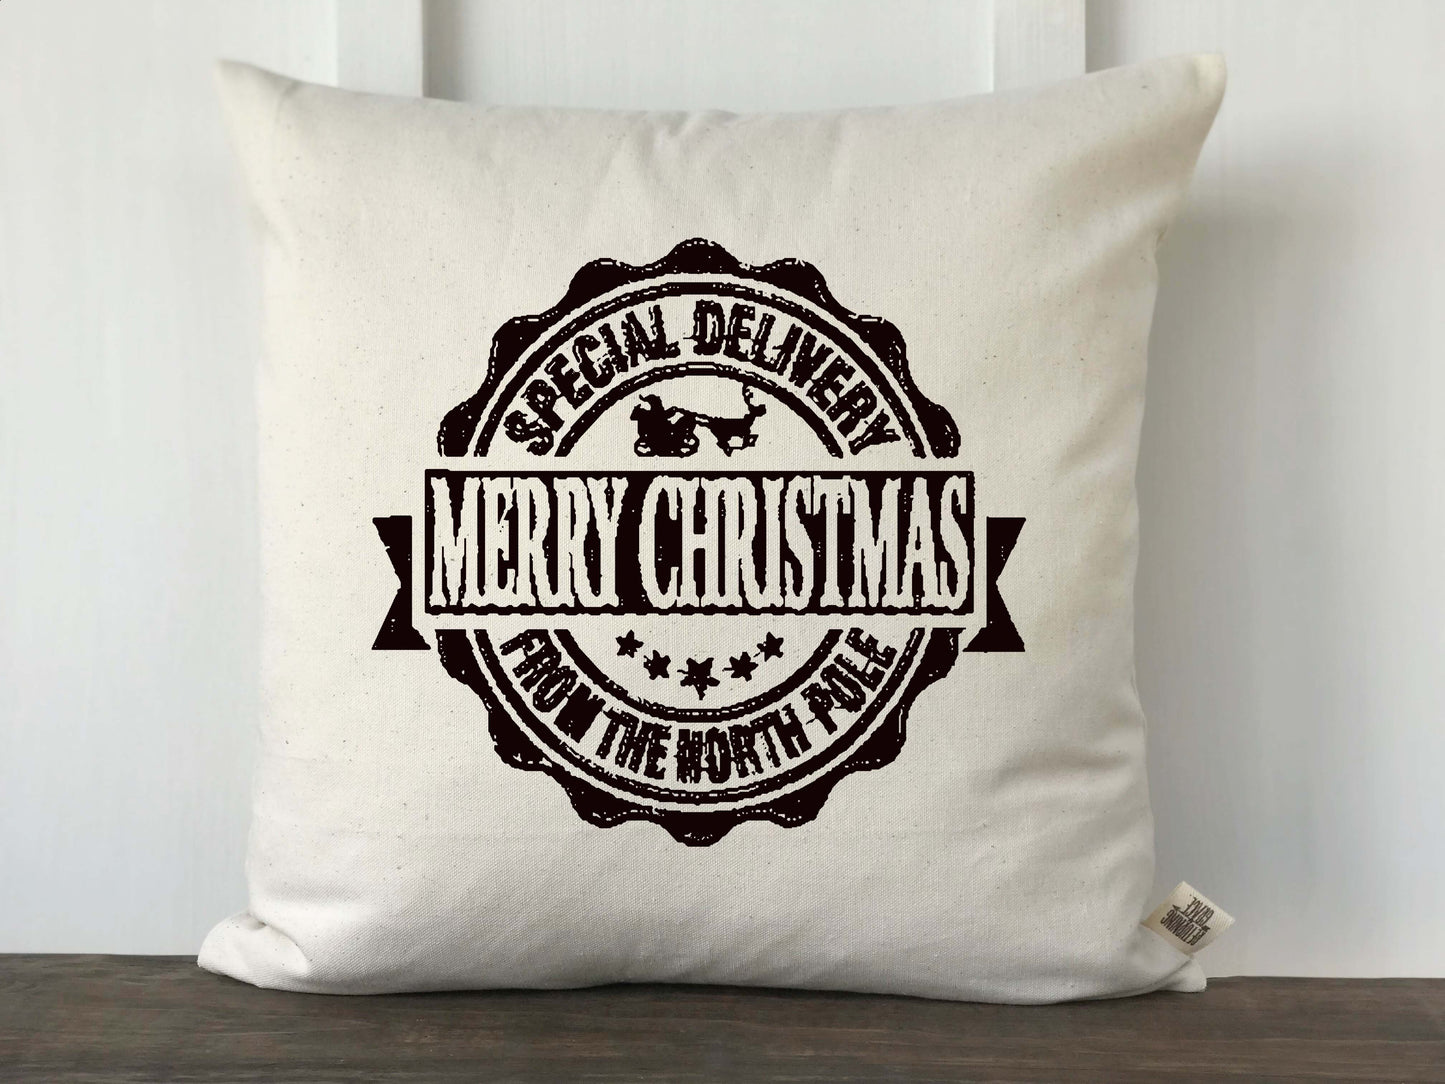 Special Delivery Postmark Pillow Cover - Returning Grace Designs